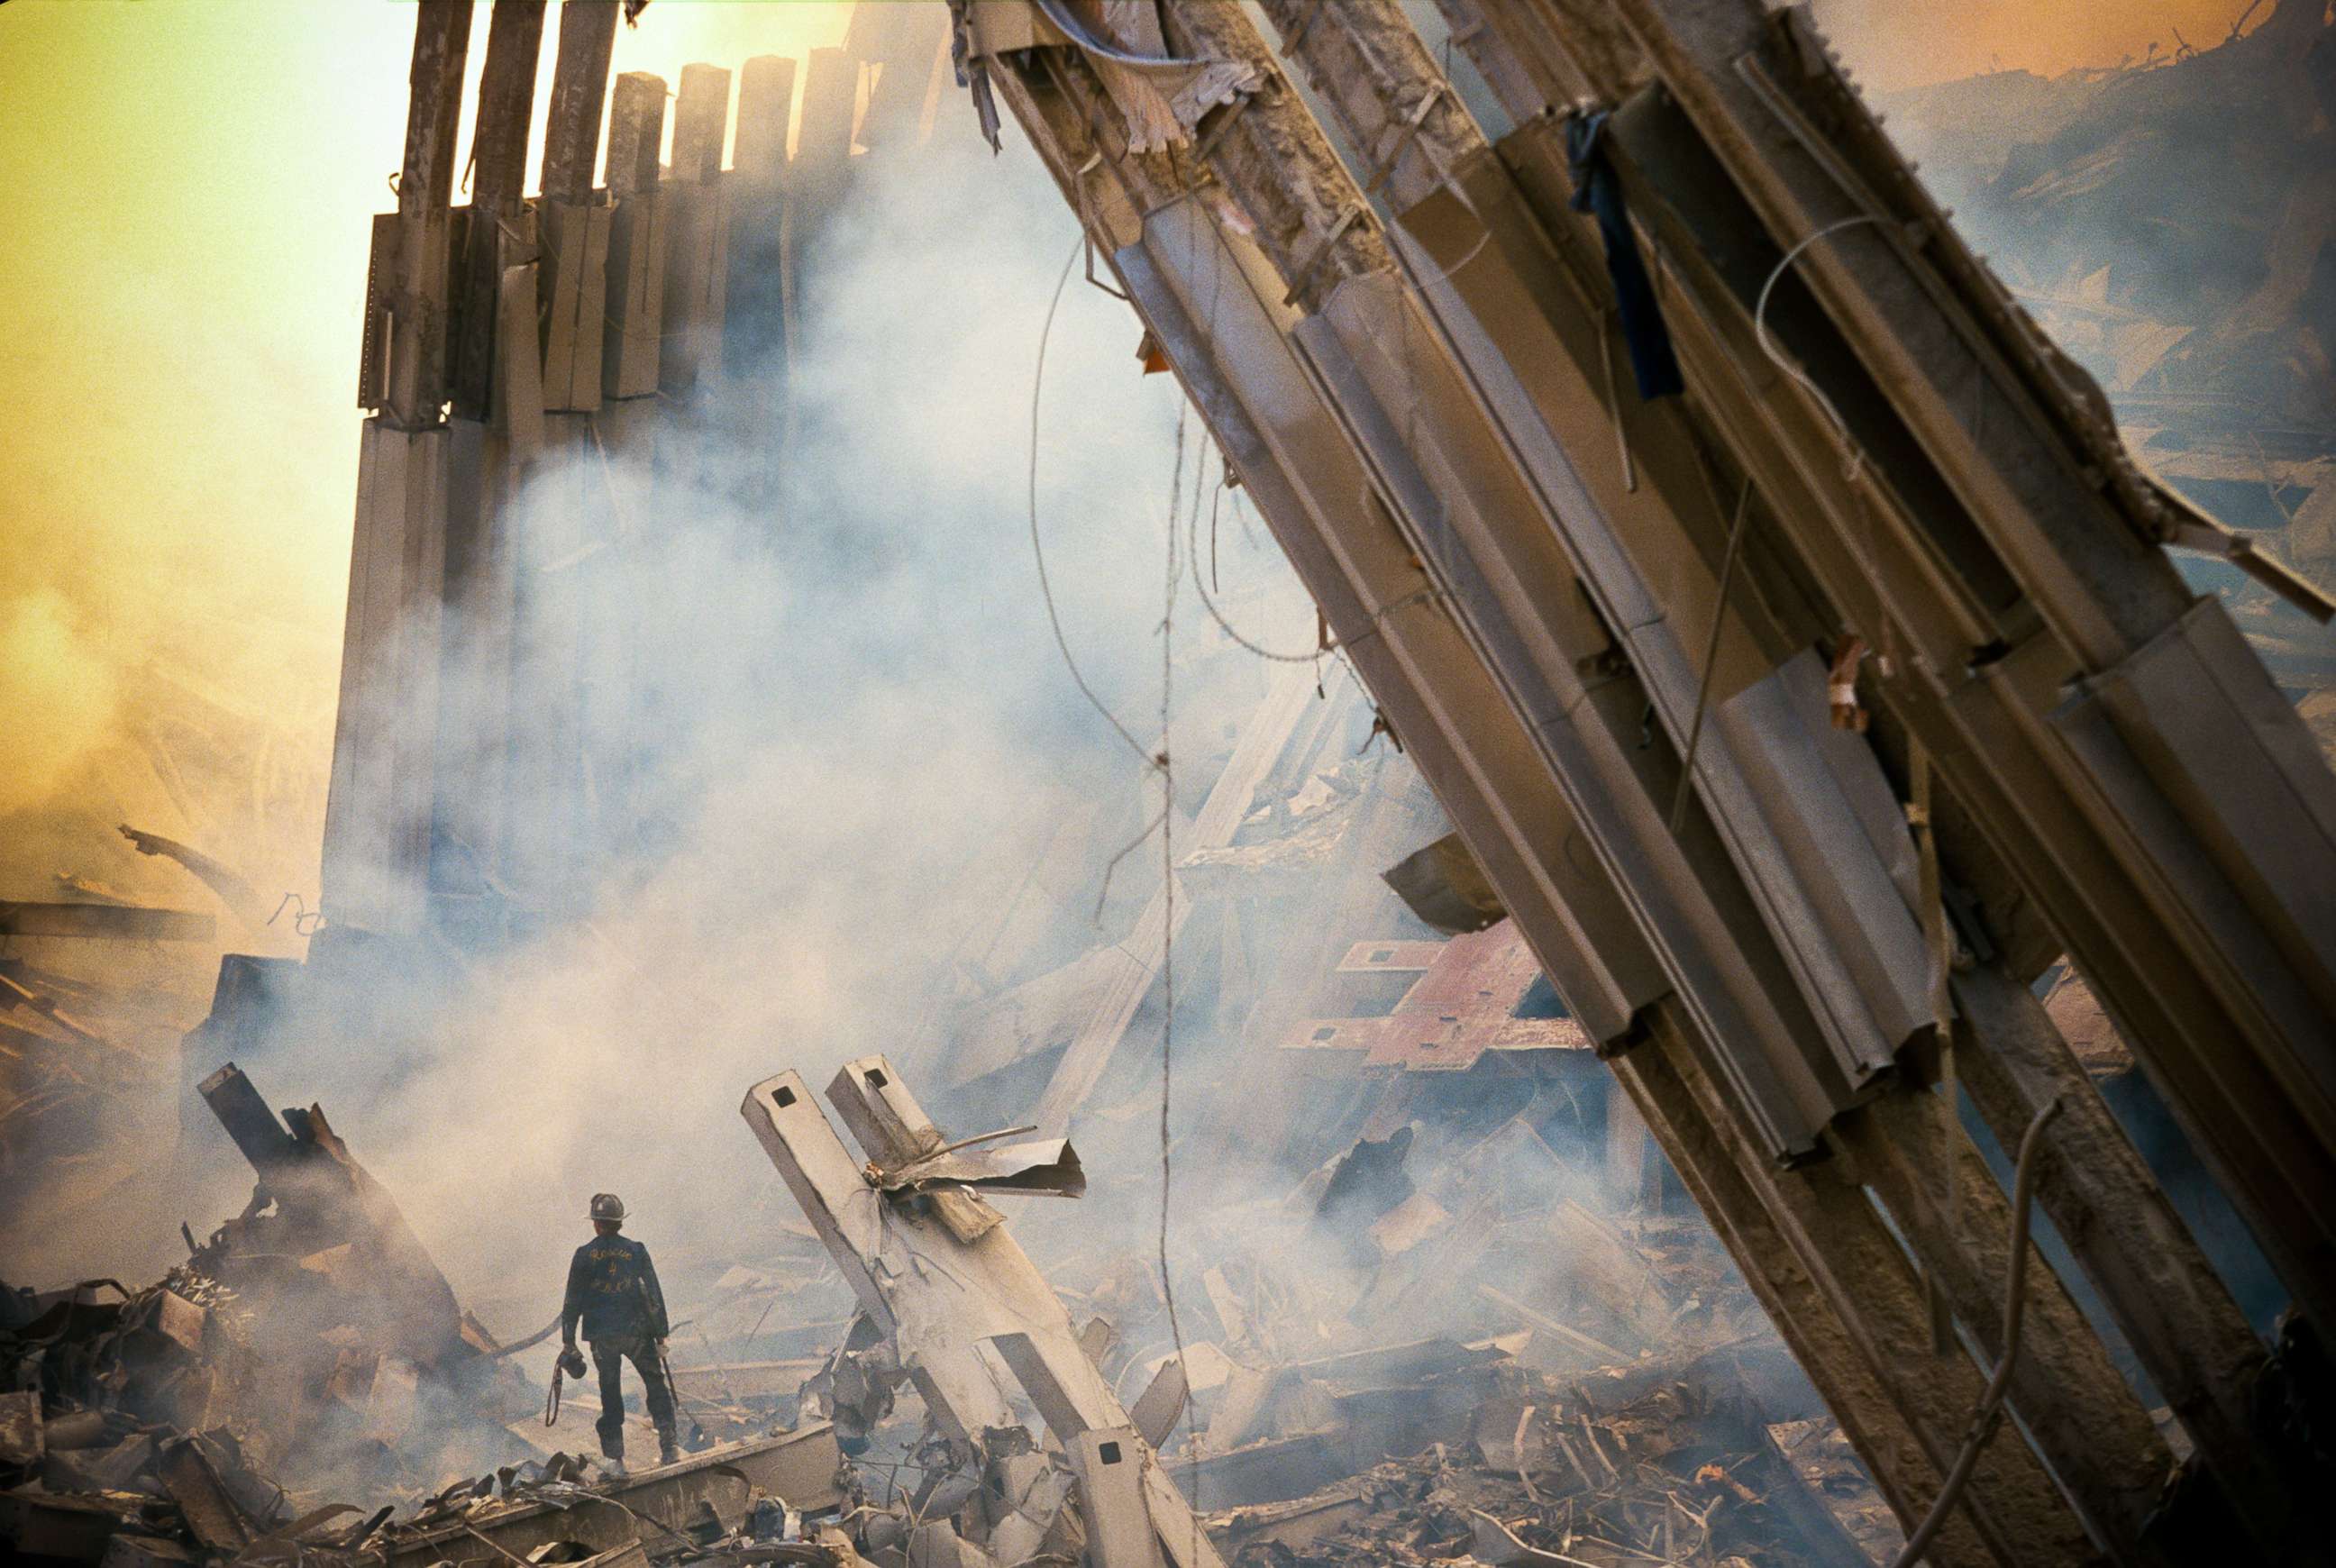 PHOTO: The rubble of the World Trade Center smoulders following a terrorist attack Sept. 11, 2001 in New York.